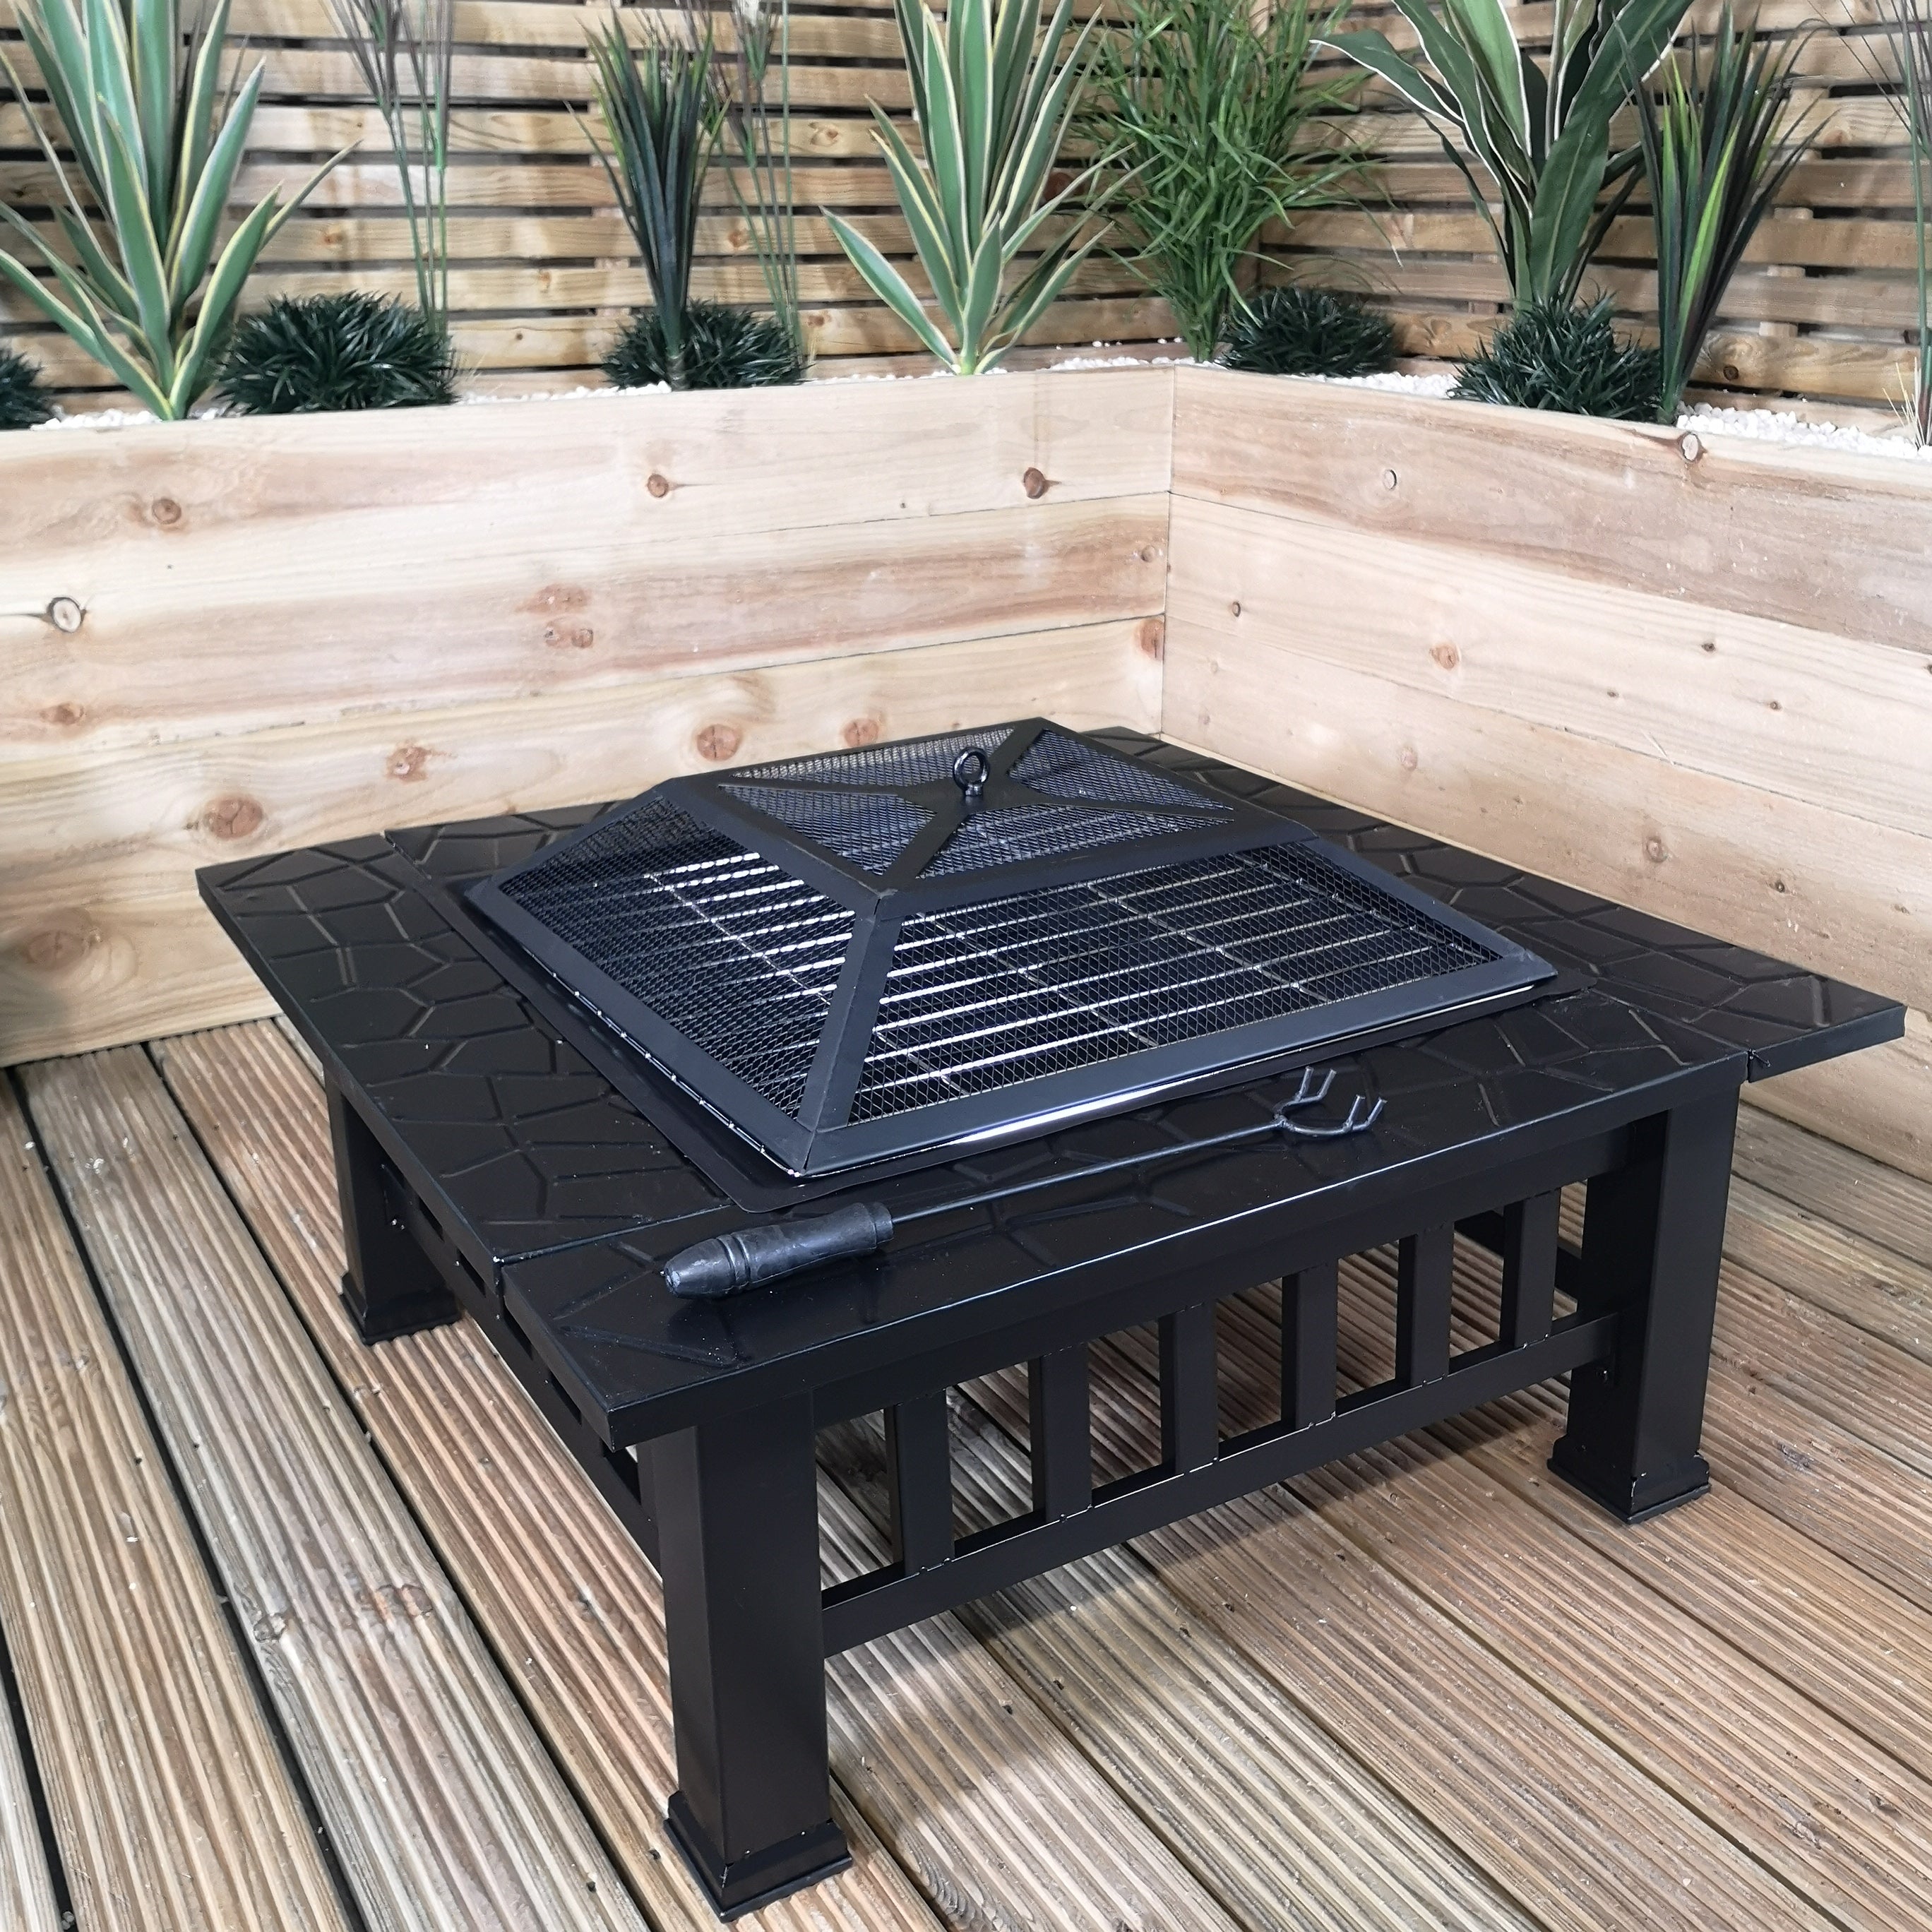 Redwood Outdoor Garden Square Fire Pit Heater with BBQ Grill in Black